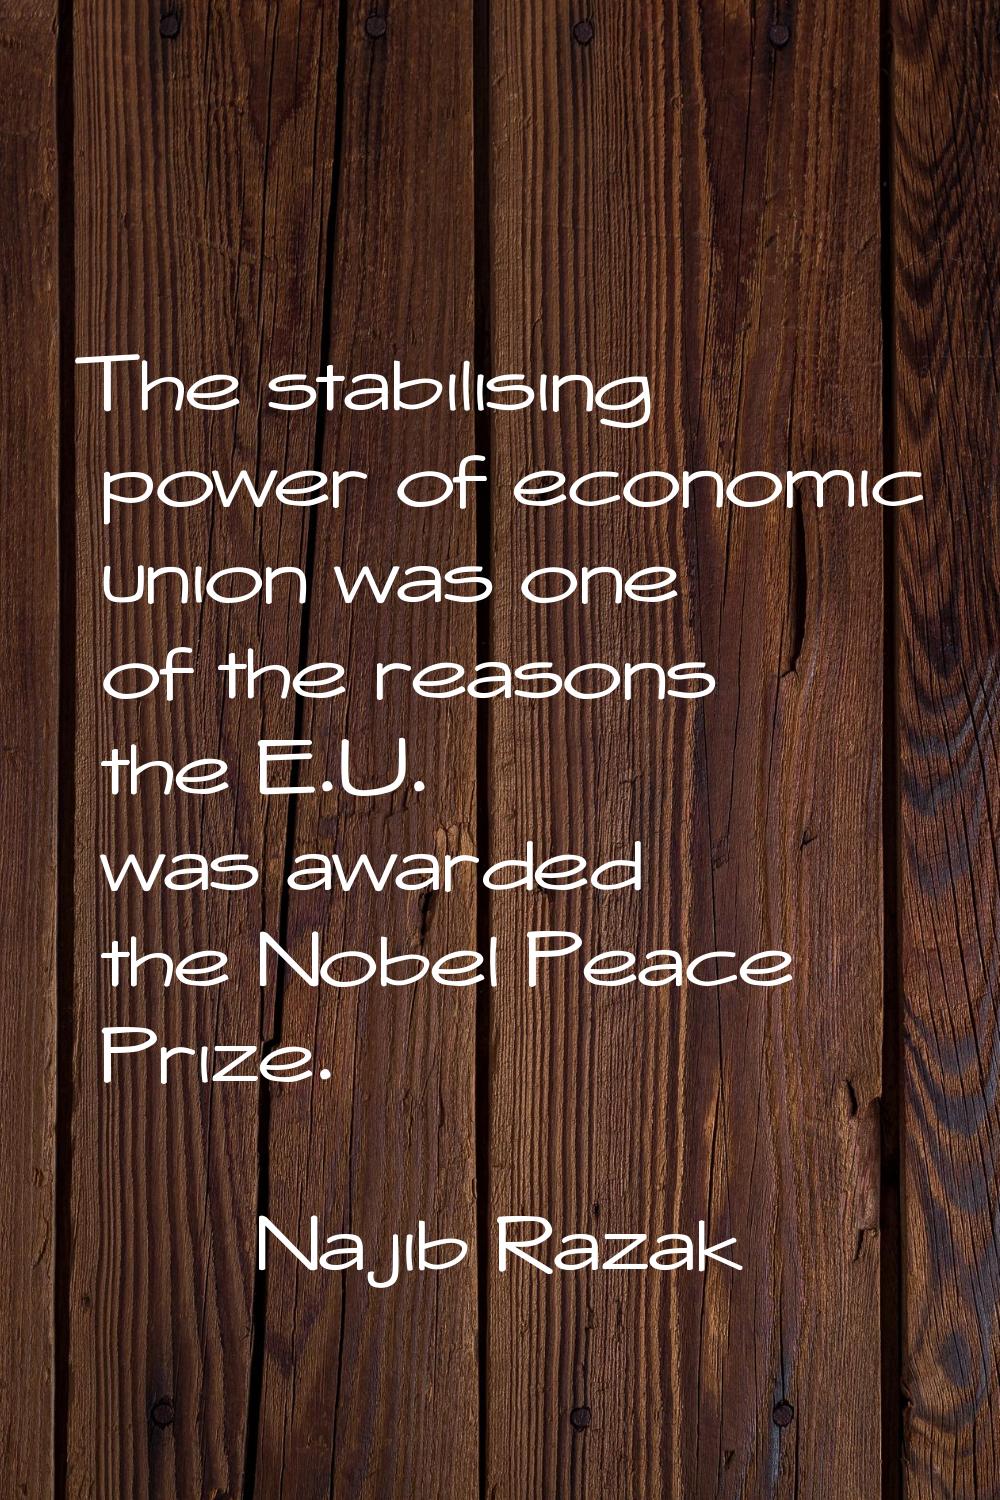 The stabilising power of economic union was one of the reasons the E.U. was awarded the Nobel Peace